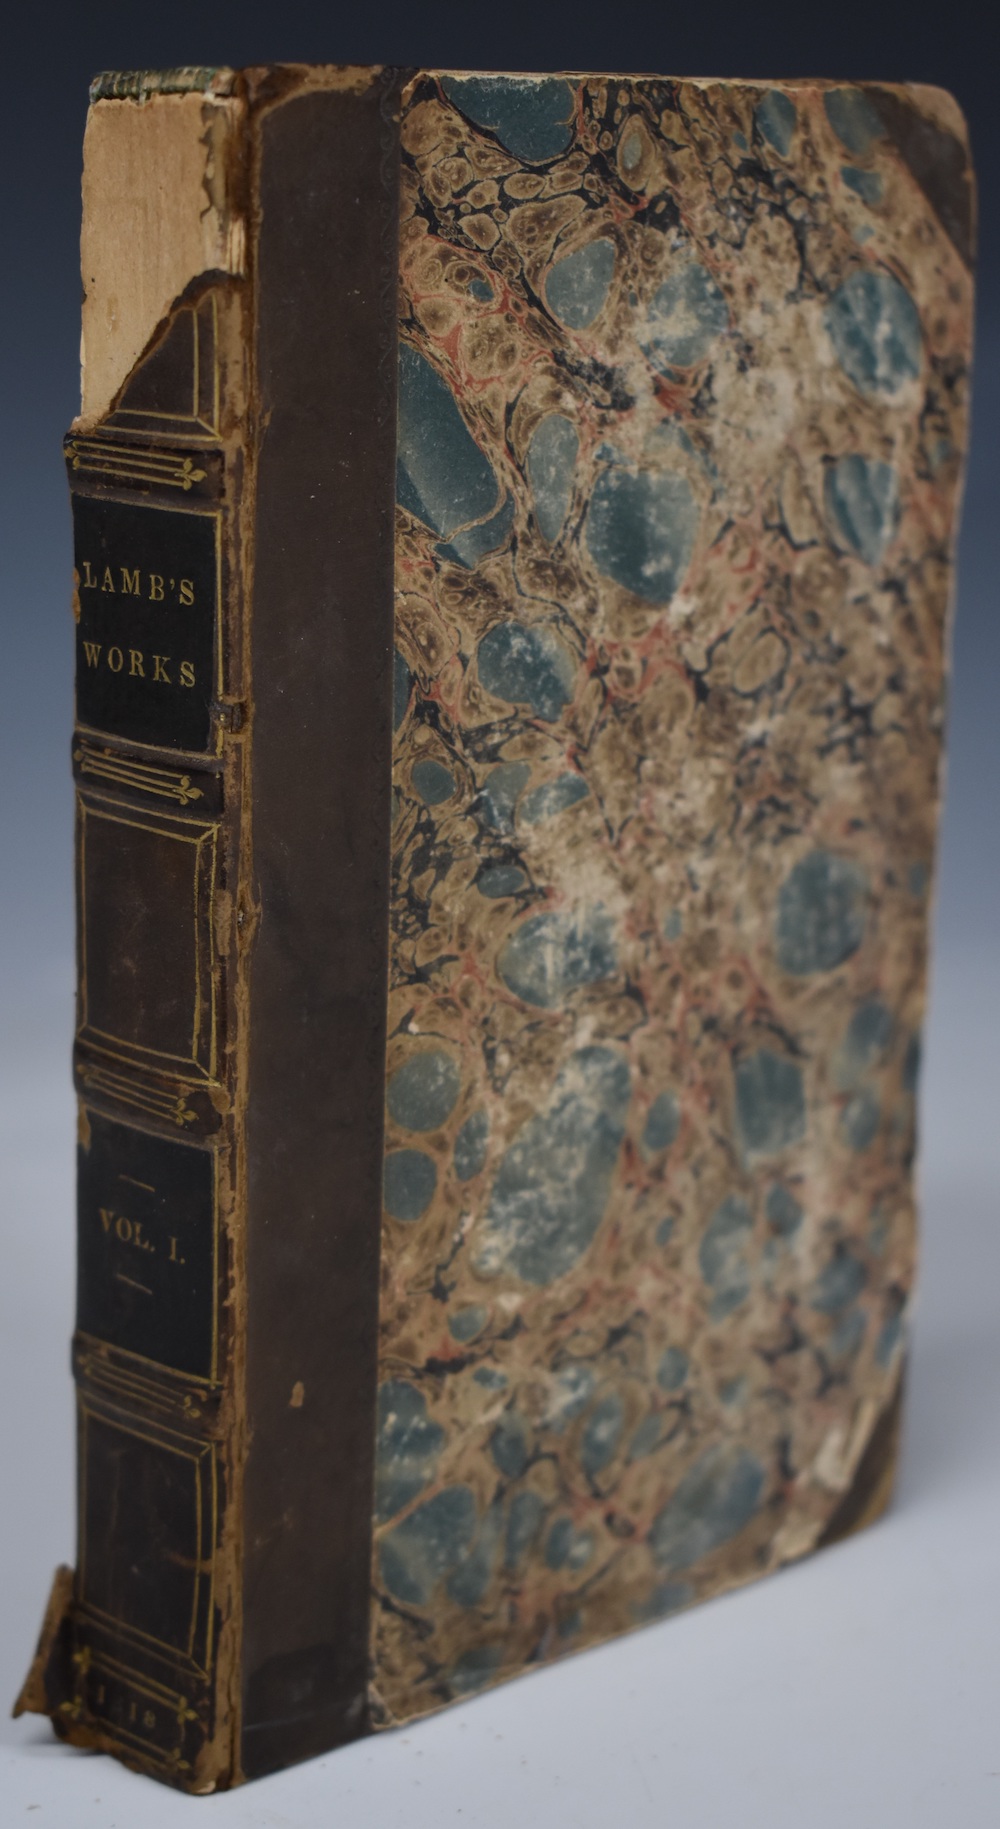 Signed William Wordsworth The Works Of Charles Lamb Printed For C. And J. Ollier 1818 Volume 1 (Of 2) Bound In Half Leather Over Marbled Boards With Raised Bands & Gilt Spine HAMMER £1300